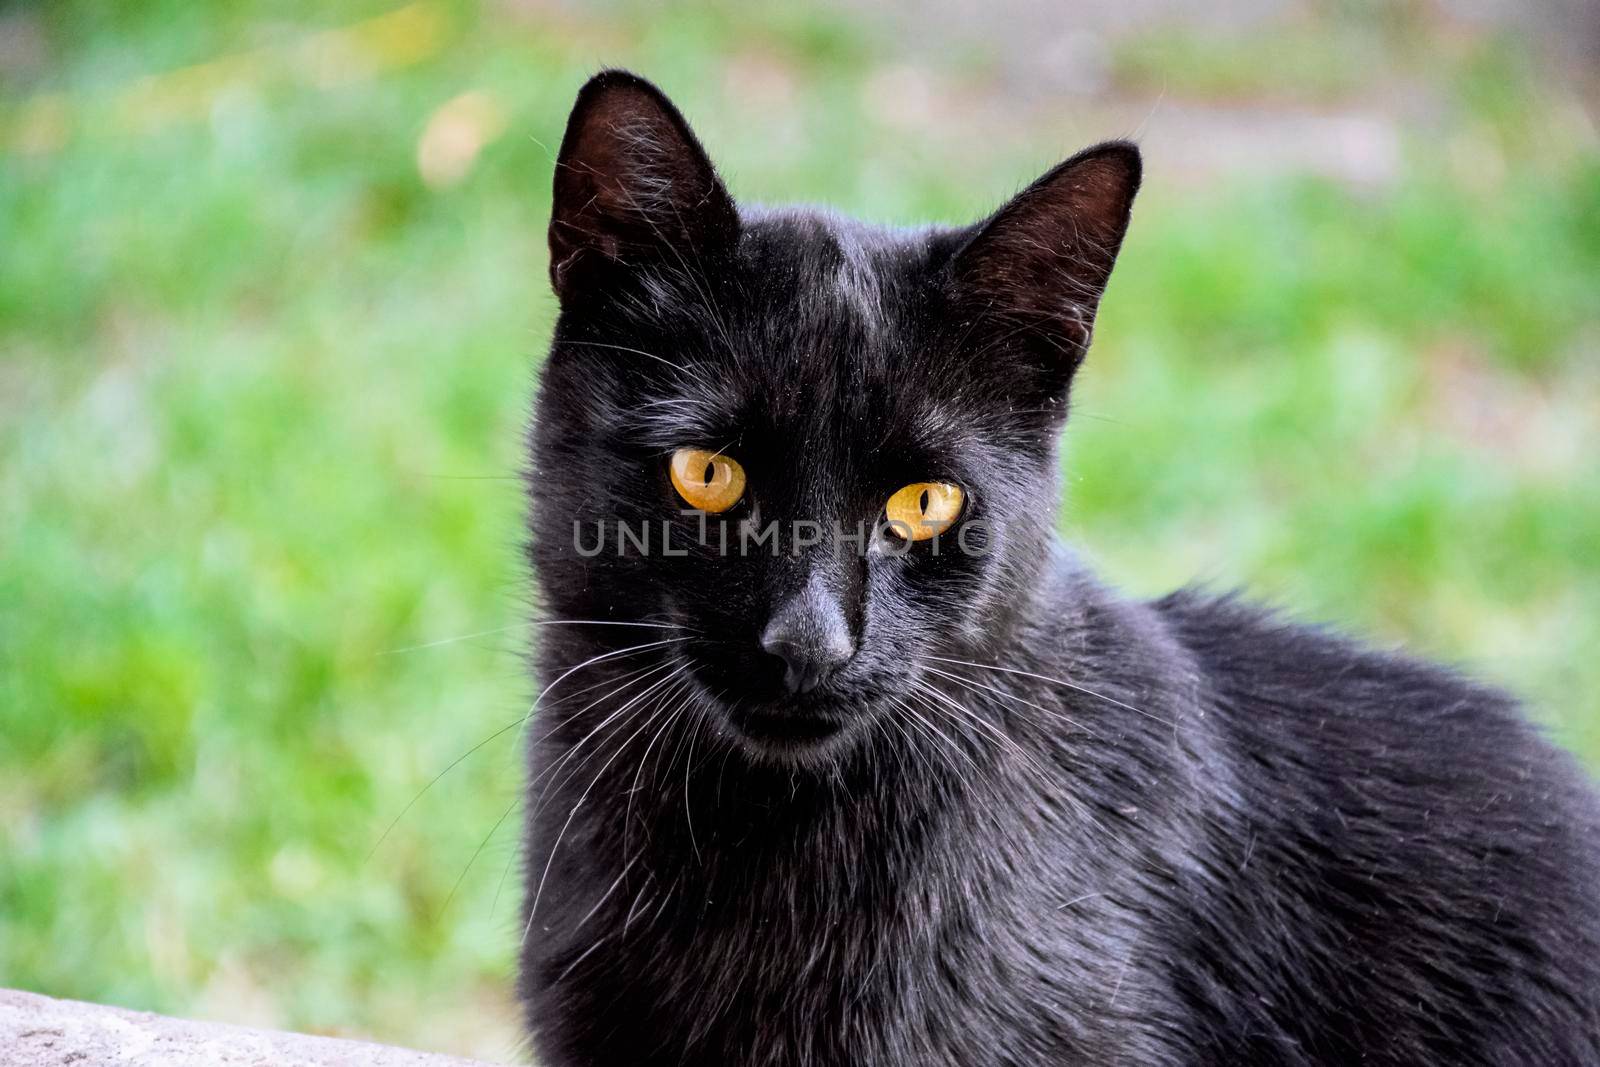 Black cat portrait with yellow eyes outdoors.